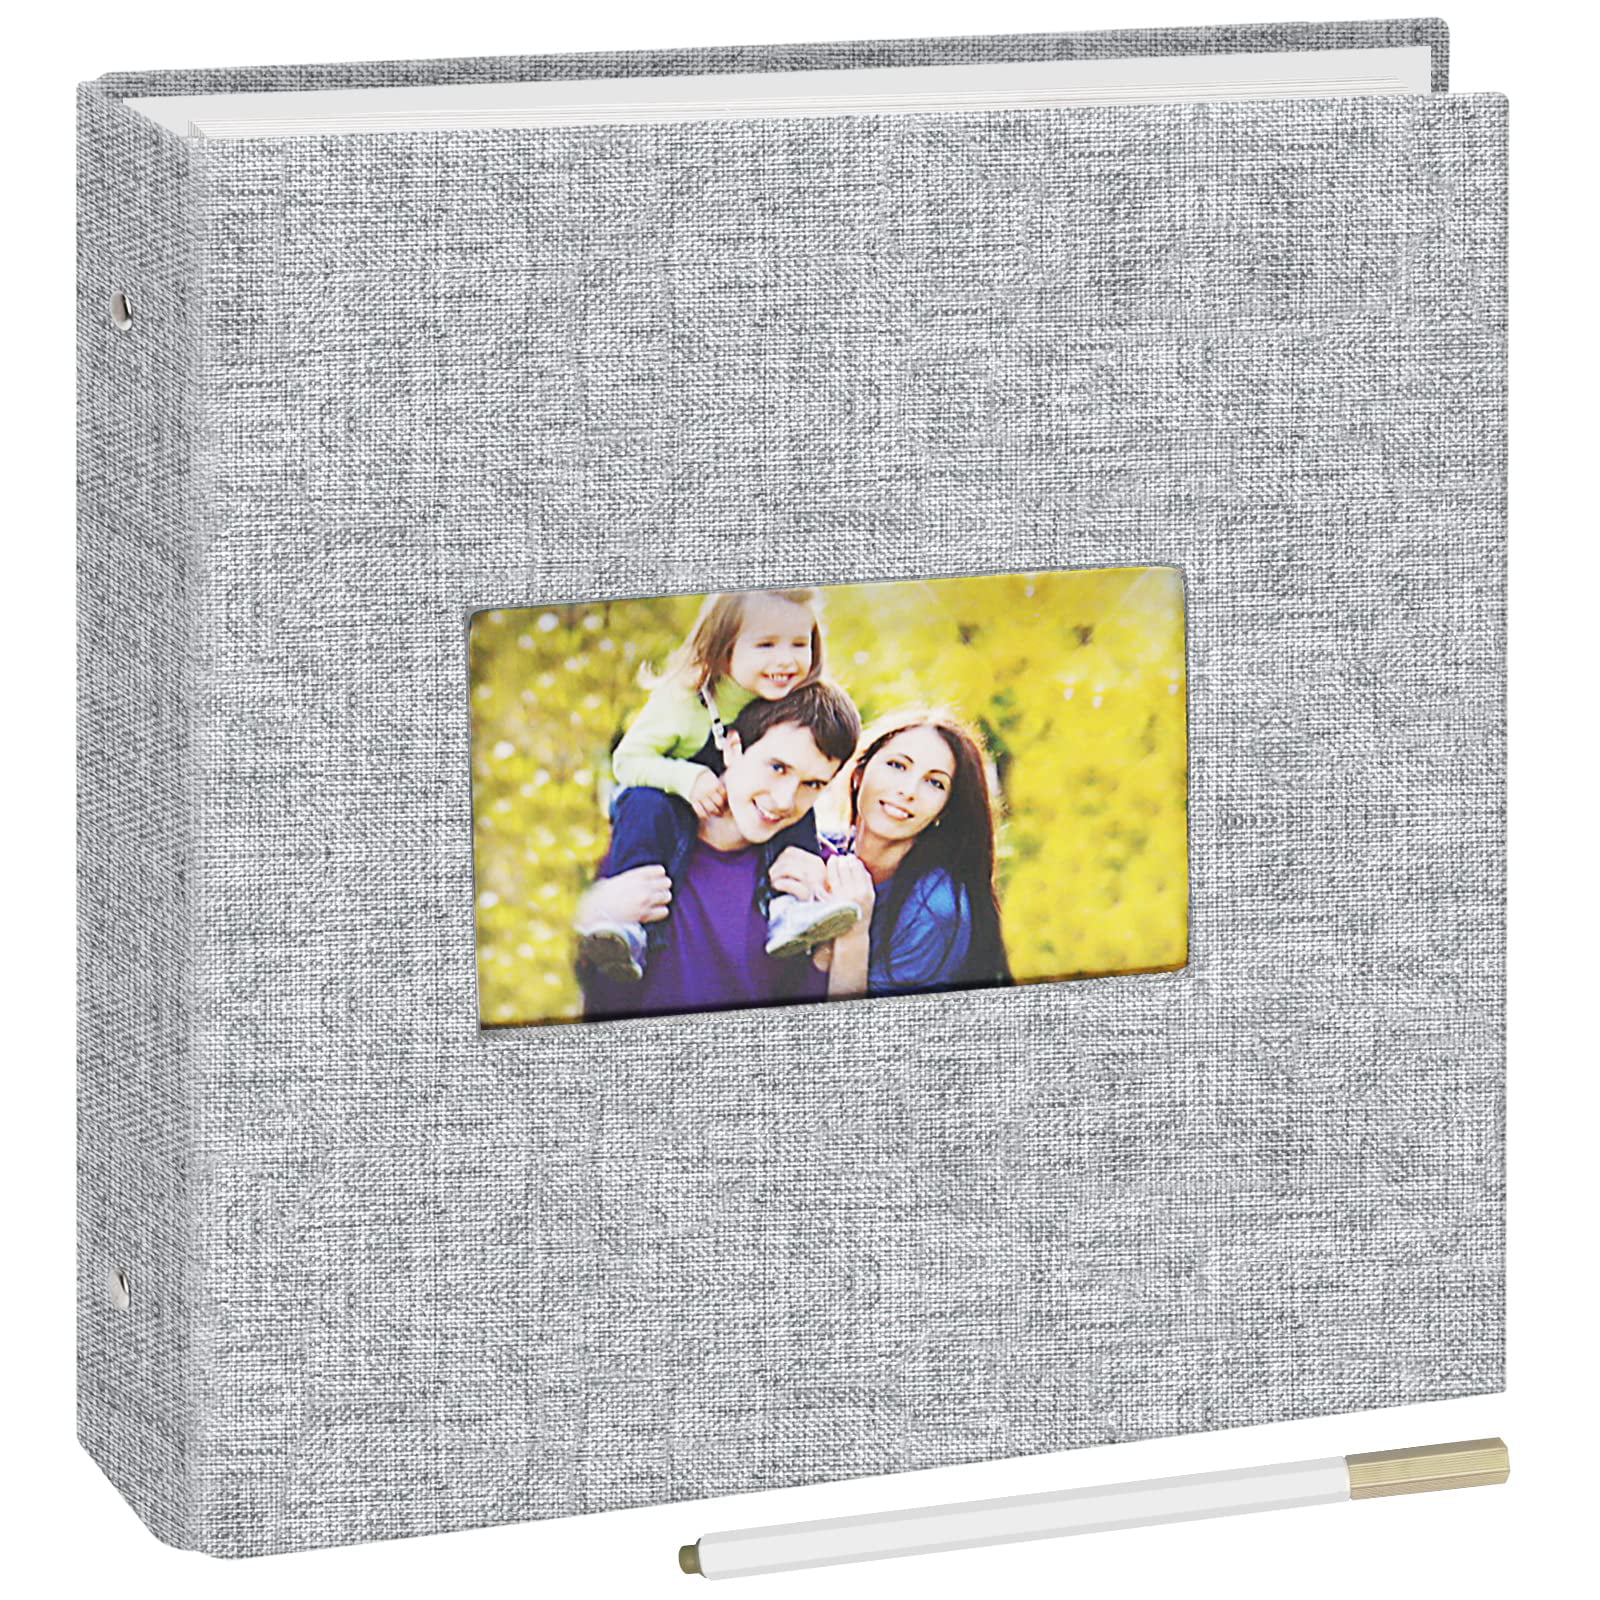 Gray RECUTMS 60 DIY Photo Albums with Sticky Pages Button Grain Leather Cover 4x6 5x7 8x10 Photos of Any Size Wedding Photo Album Baby Picture Book Family Scrapbook Photo Album 